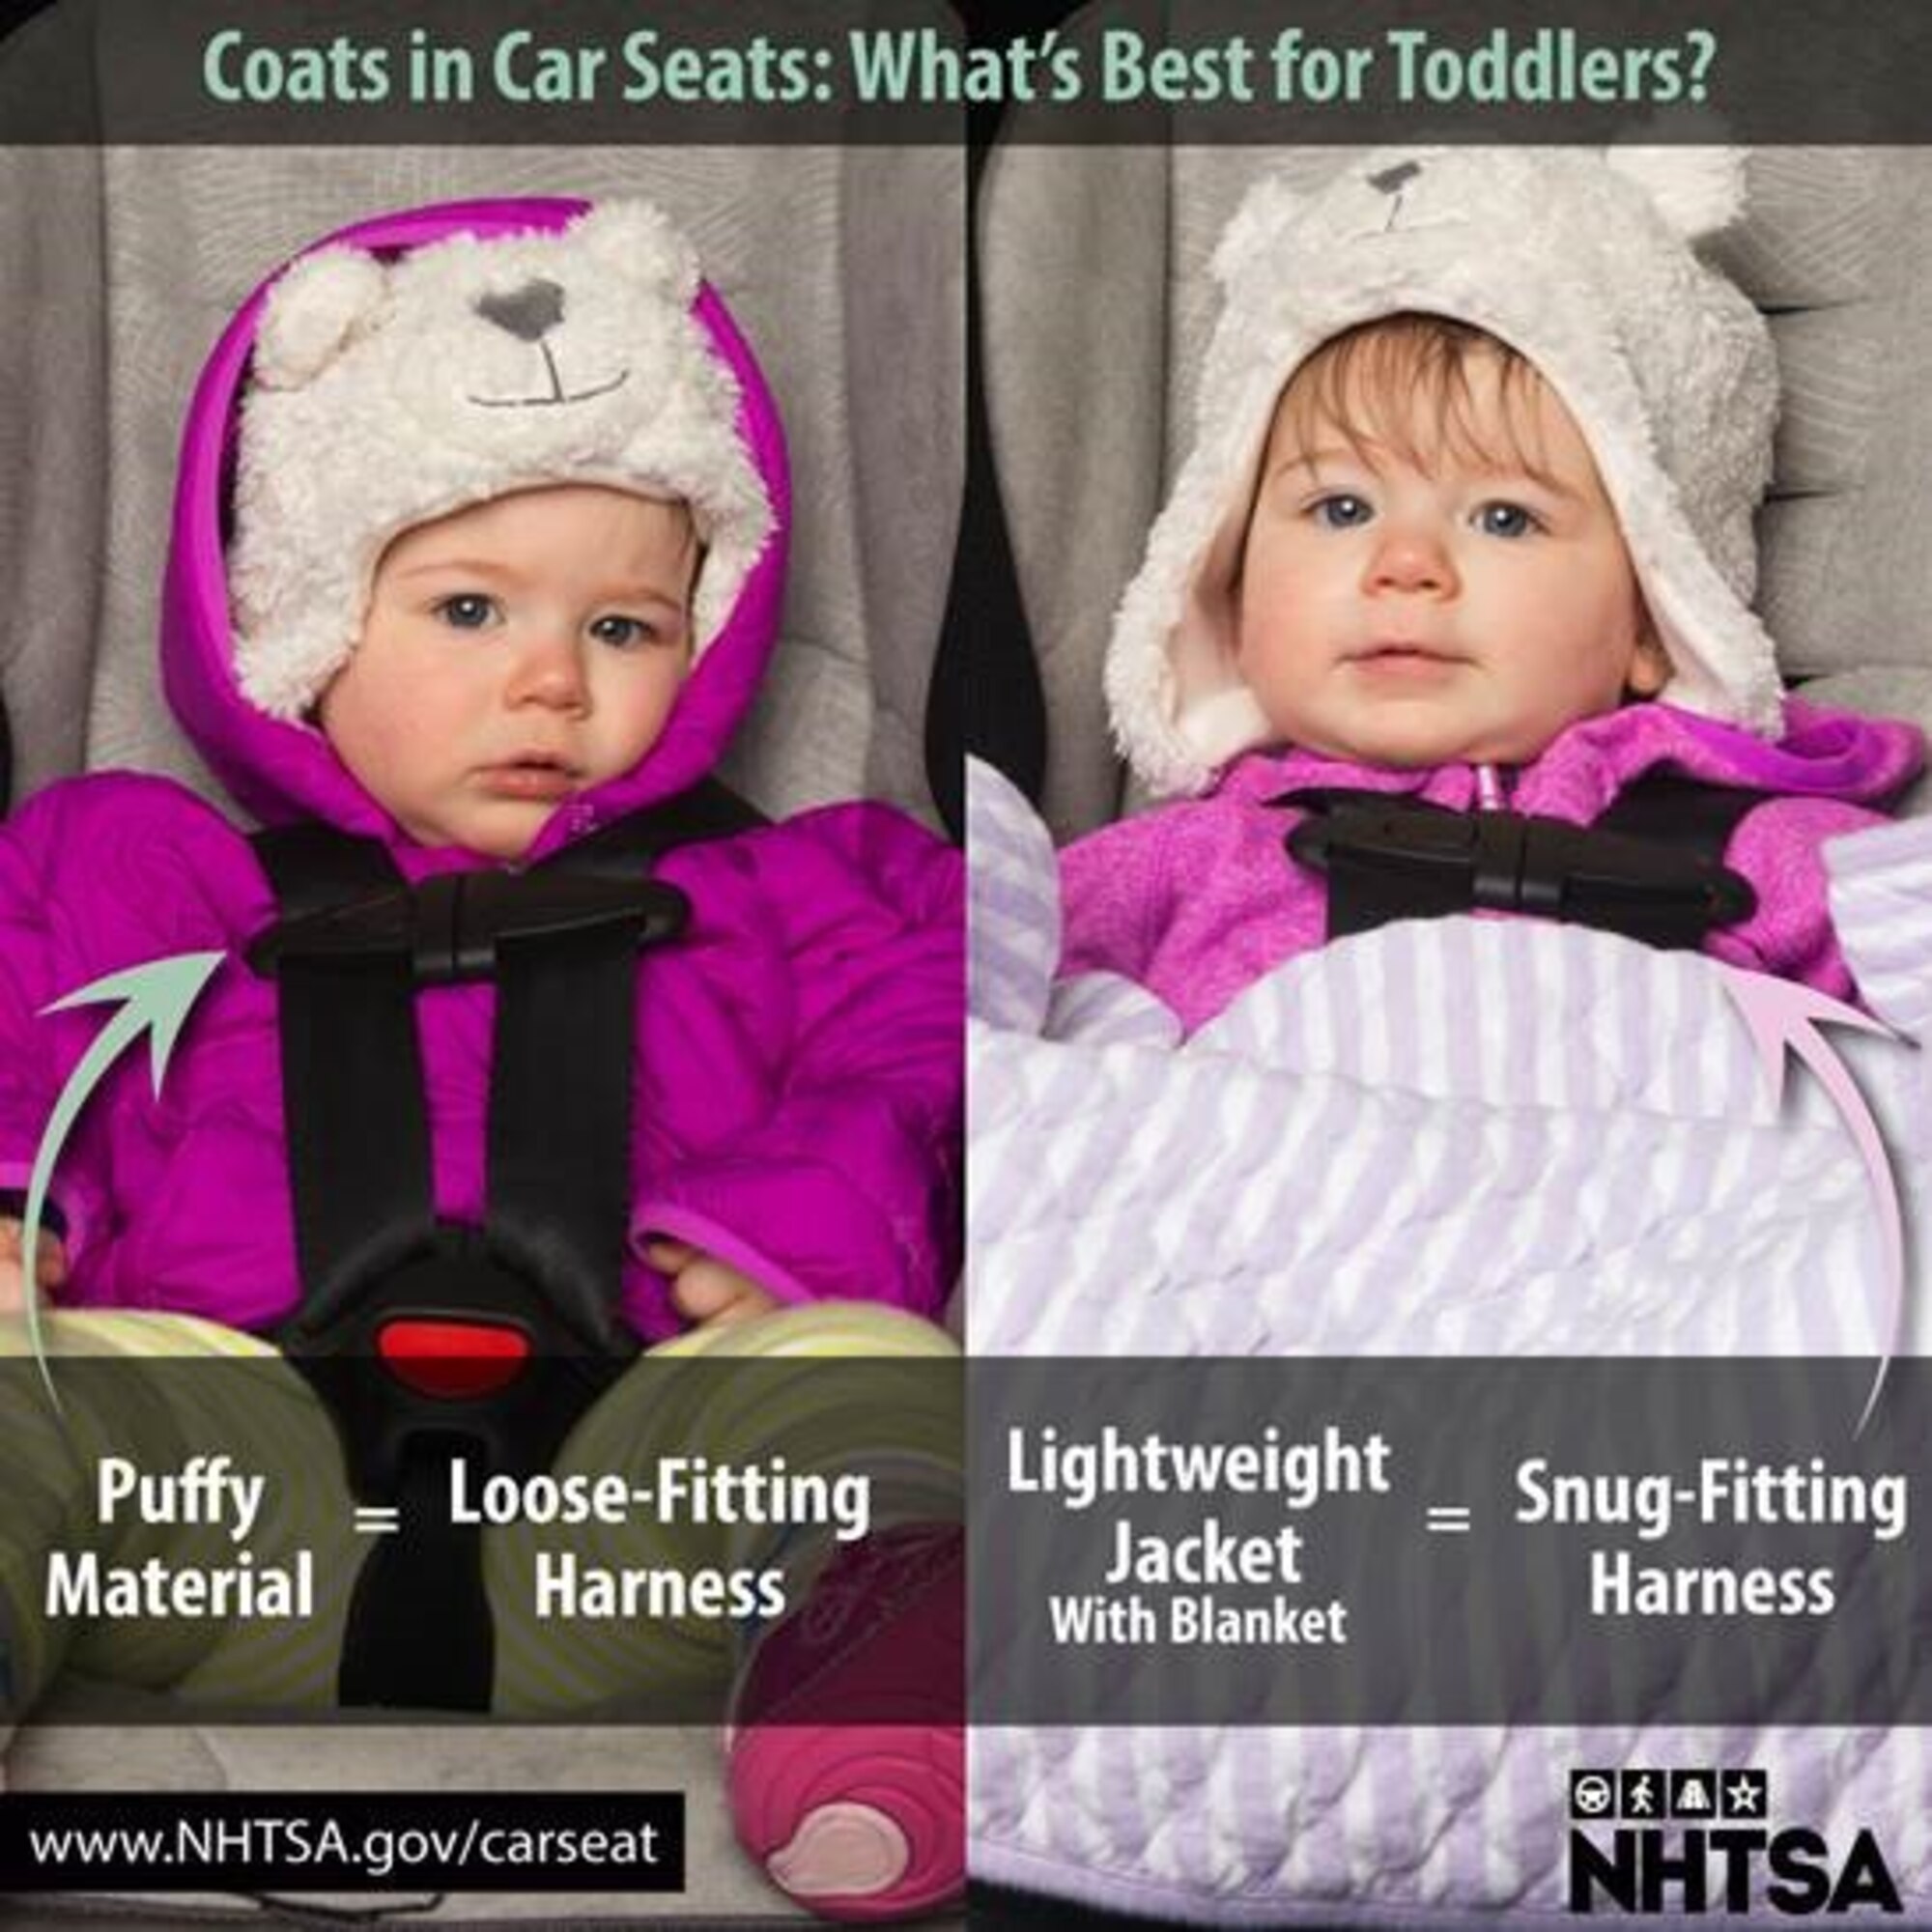 Baby, It's Cold Outside! Winter Coat Suggestions for Kids in Carseats –  CarseatBlog